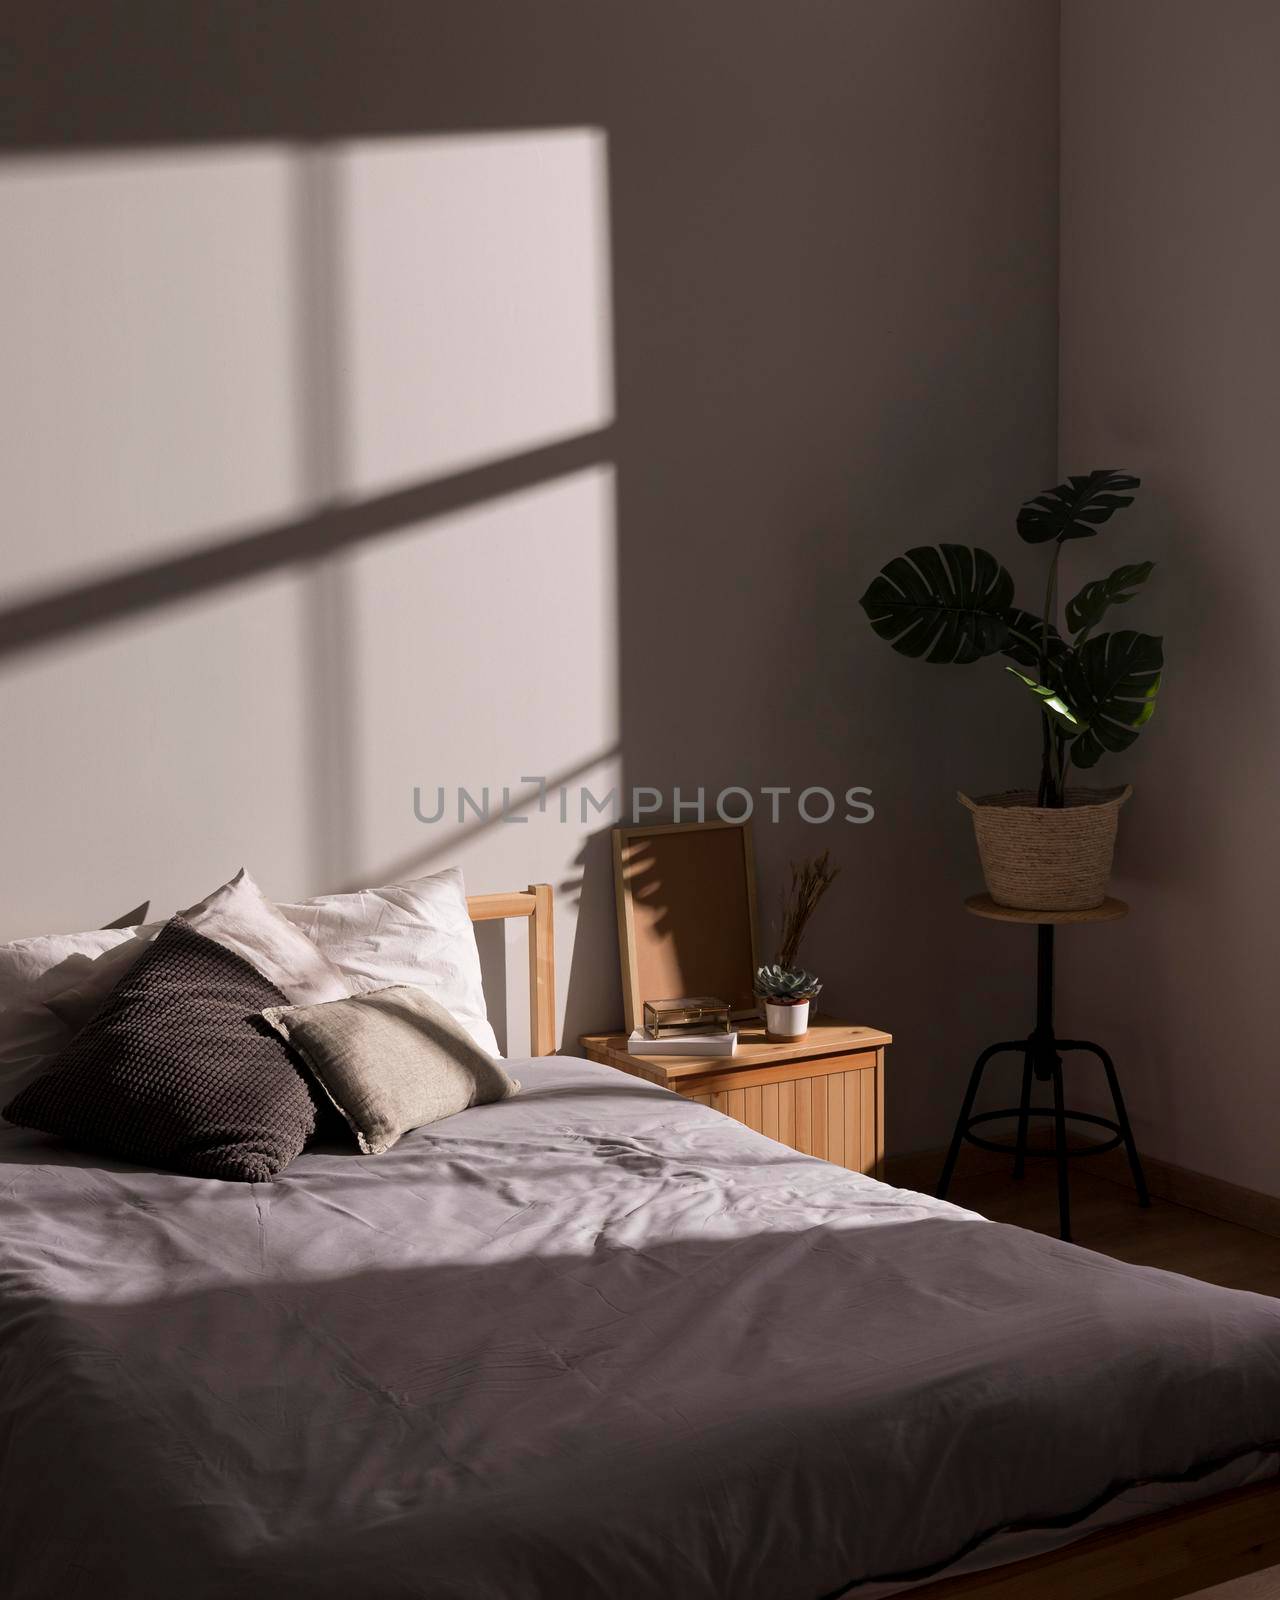 minimalistic bed with interior plant. High quality photo by Zahard